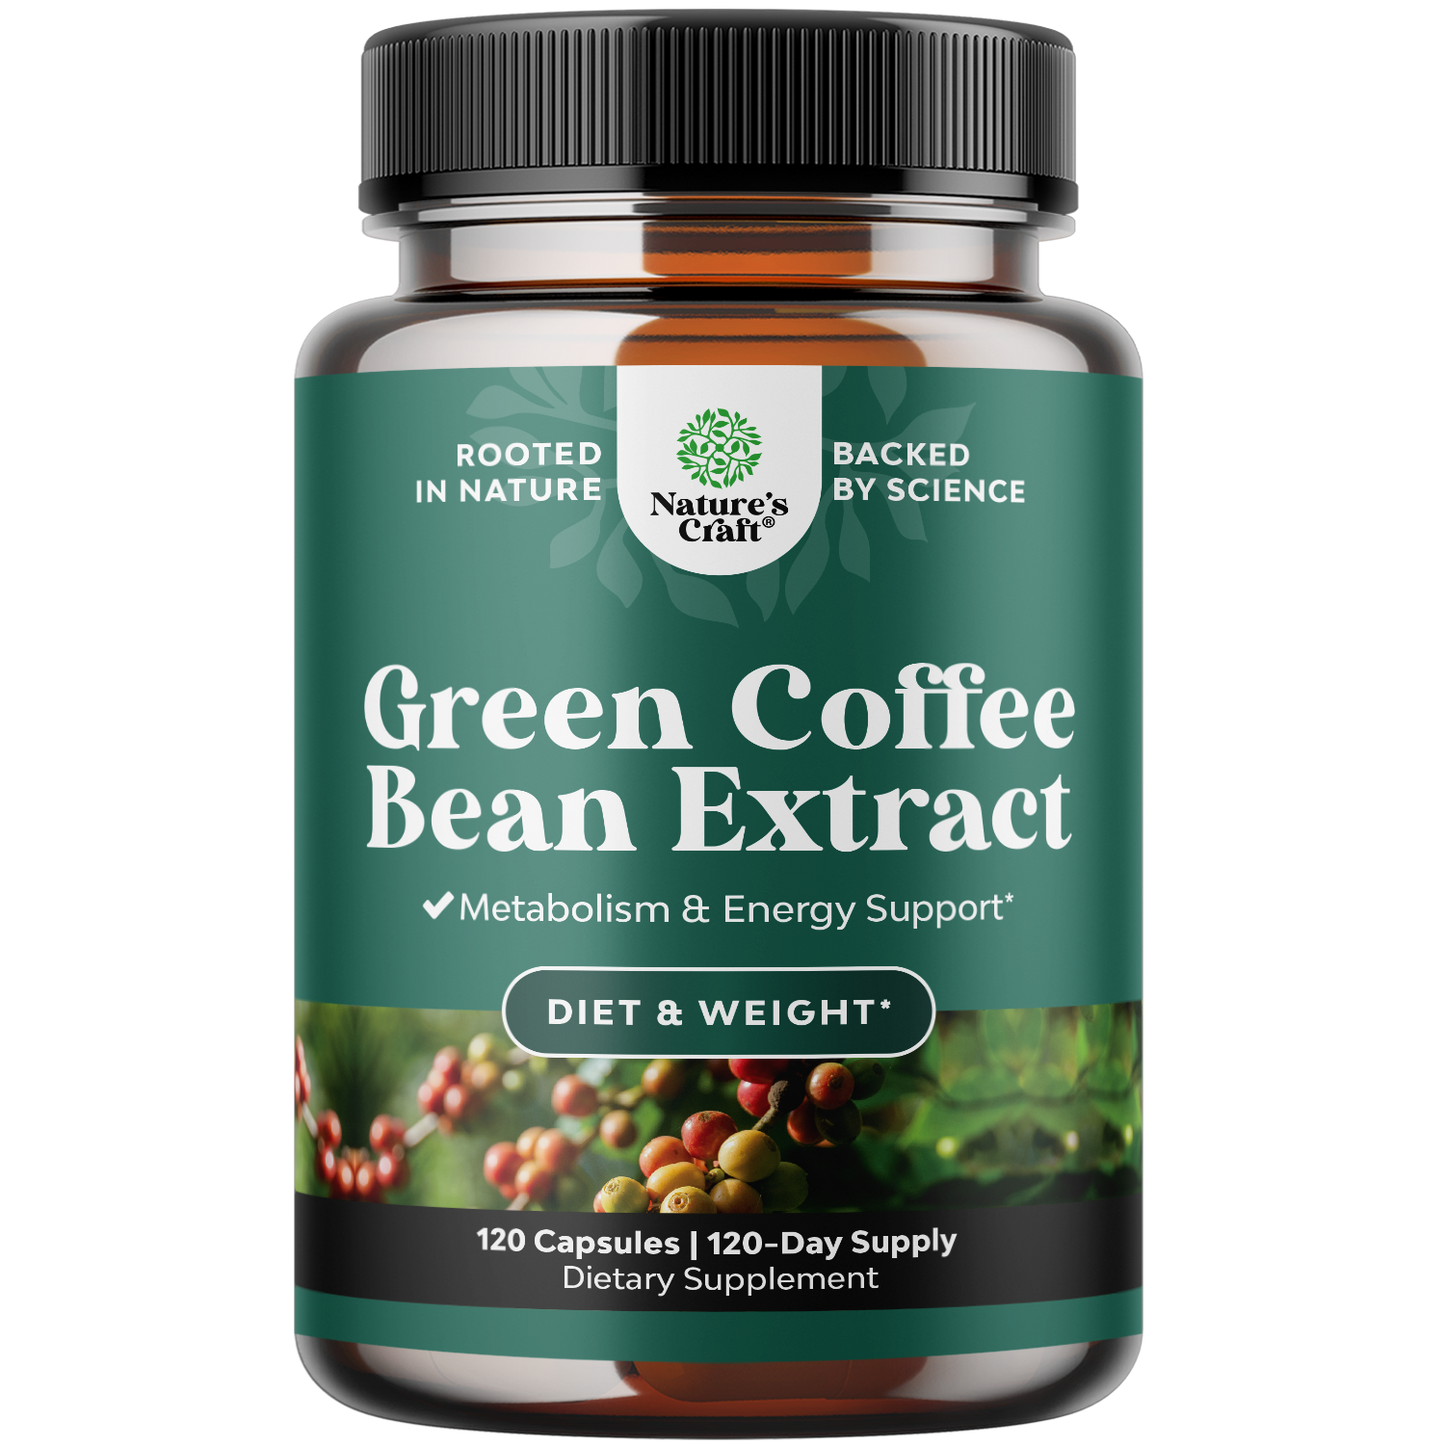 Green Coffee Bean Extract - 120 Capsules